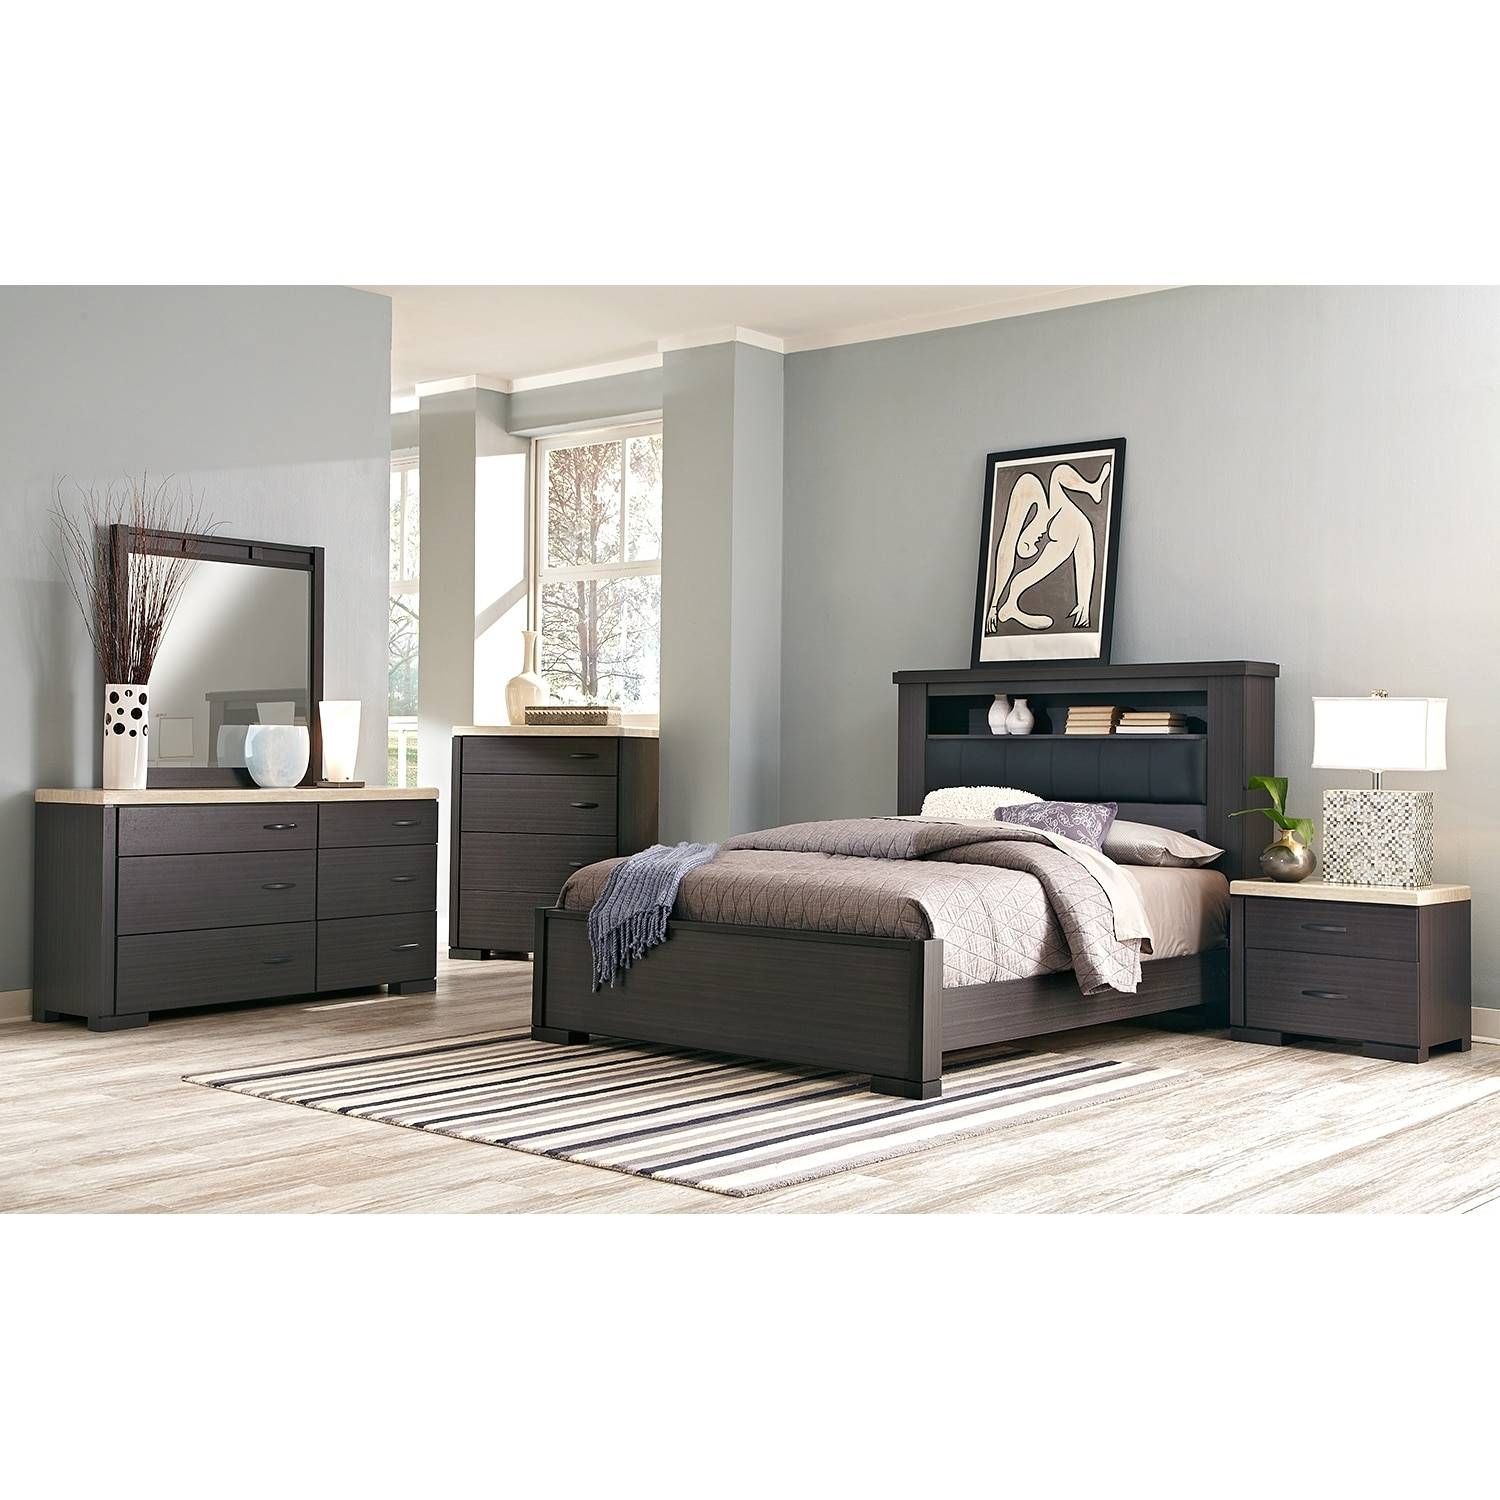 Furniture: Value City Furniture Outlet | Value City Furniture Within Sofas Cincinnati (View 18 of 25)